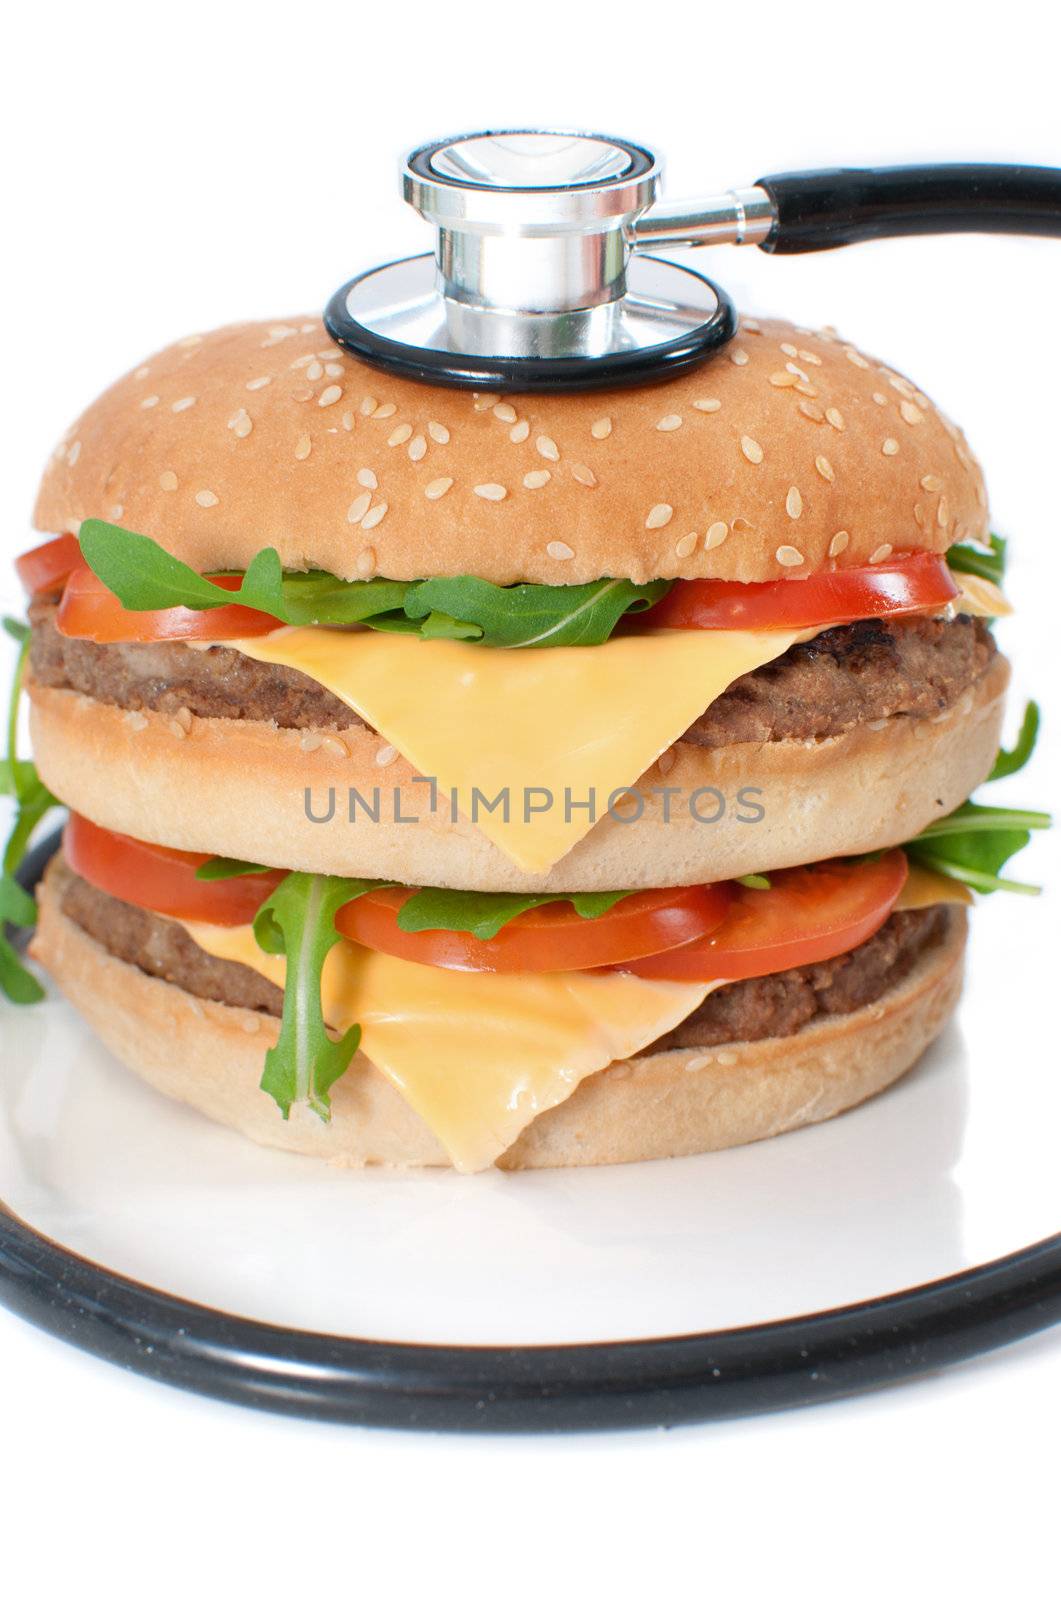 Unhealthy burger with stethoscope by unikpix